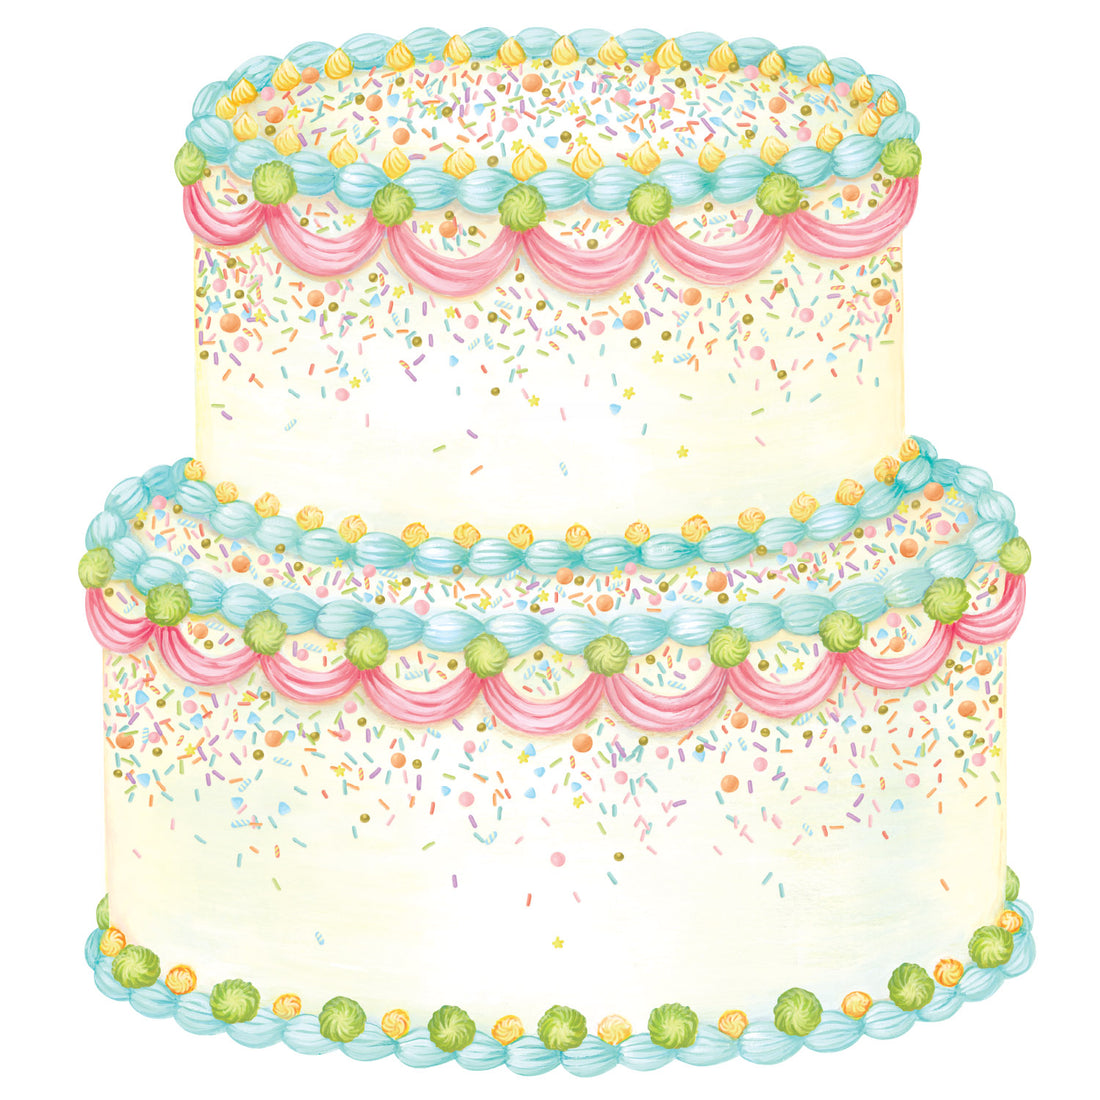 A delightful illustration of a two-tiered birthday cake in a light cream color, with decorative icing and sprinkles in pink, blue, green, yellow and gold.